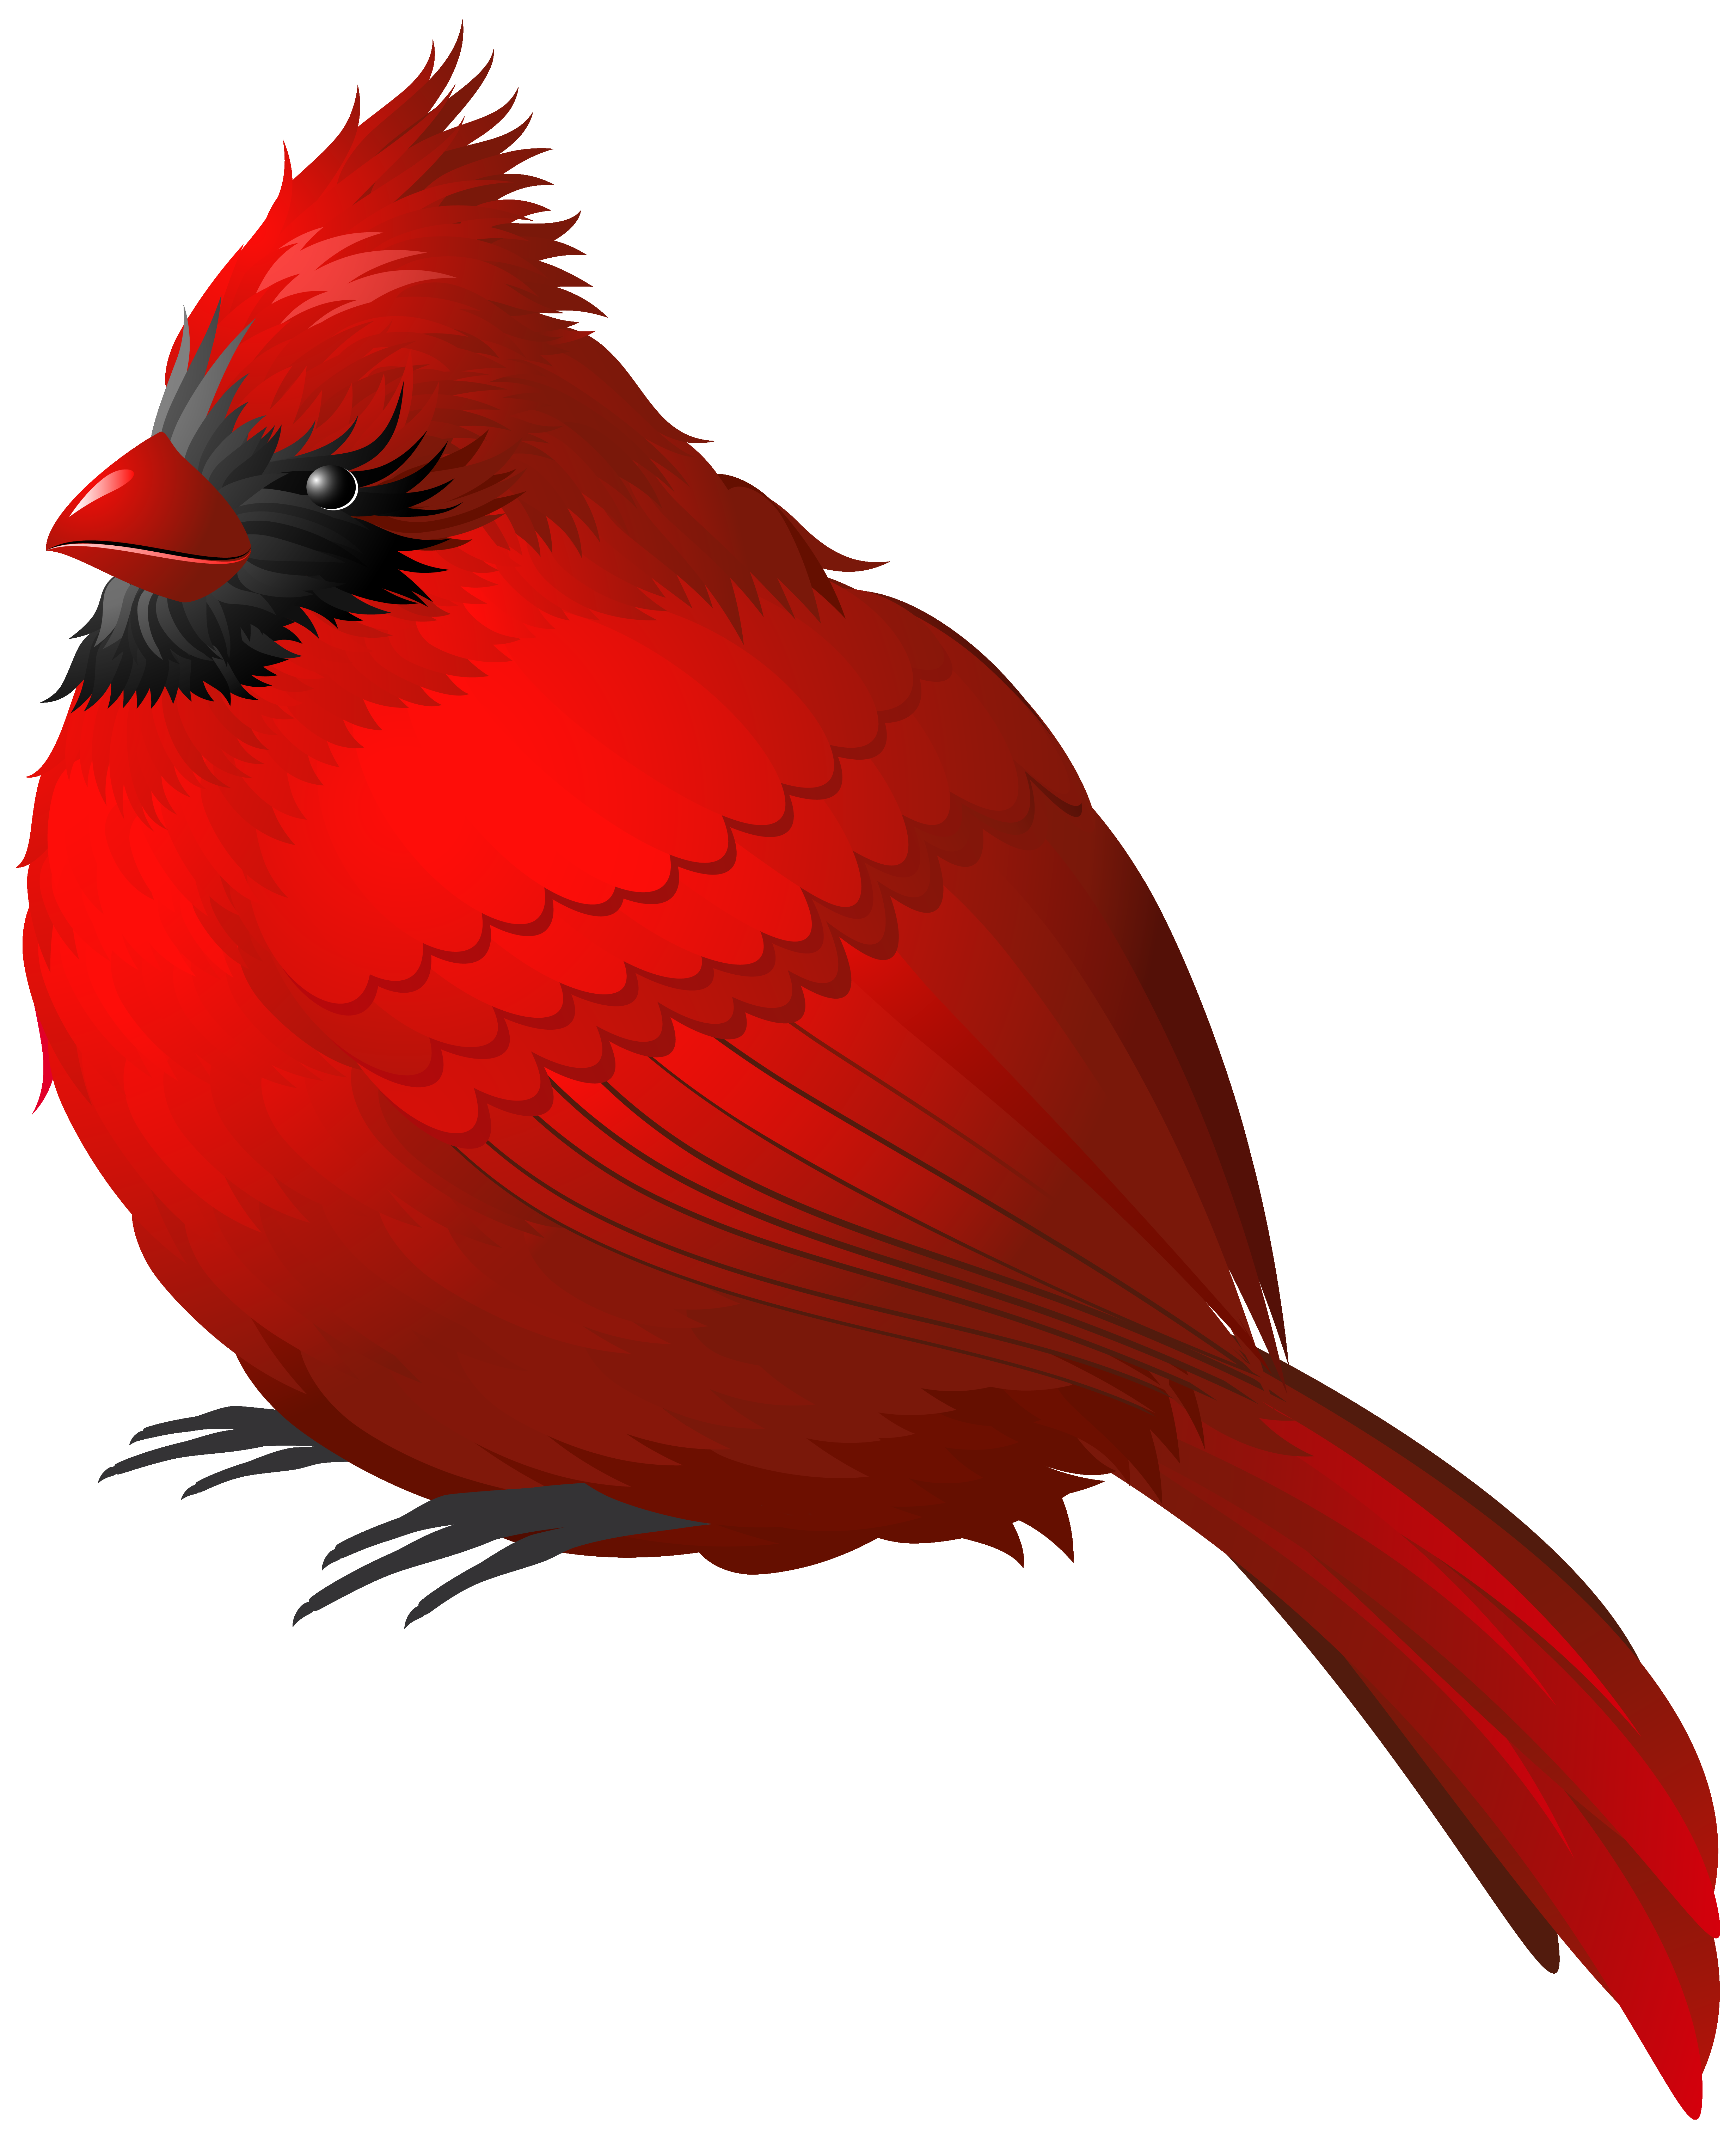 Red Winter Bird PNG Clipart Image